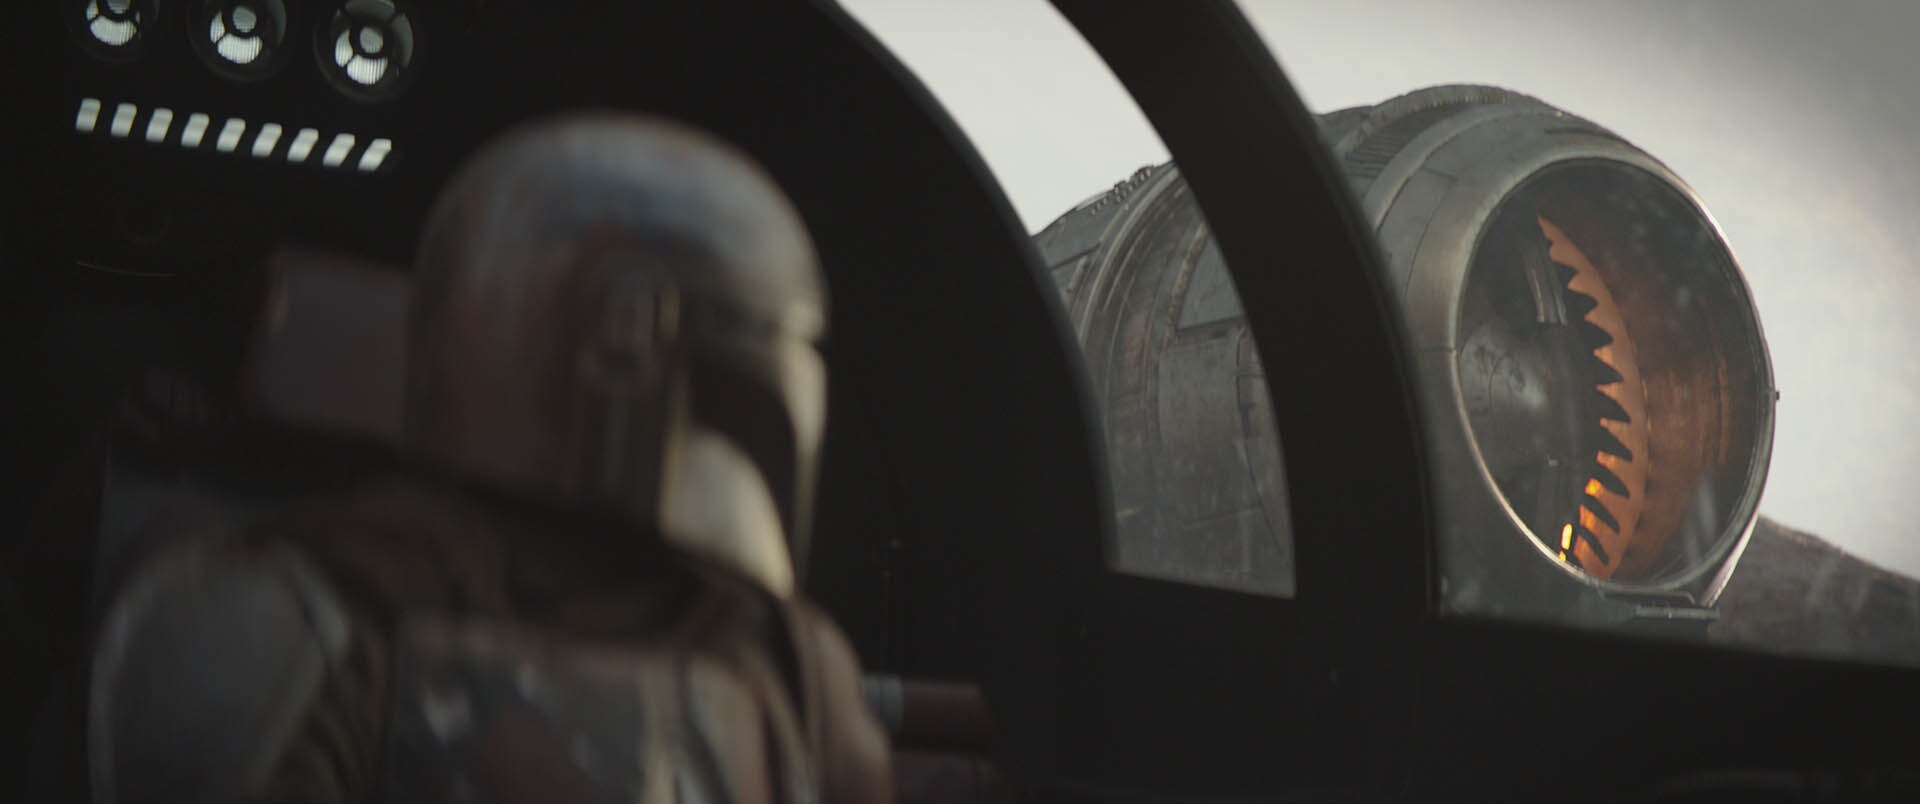 The Mandalorian returns to the Jawas and delivers the egg. True to their word, the Jawas return t...